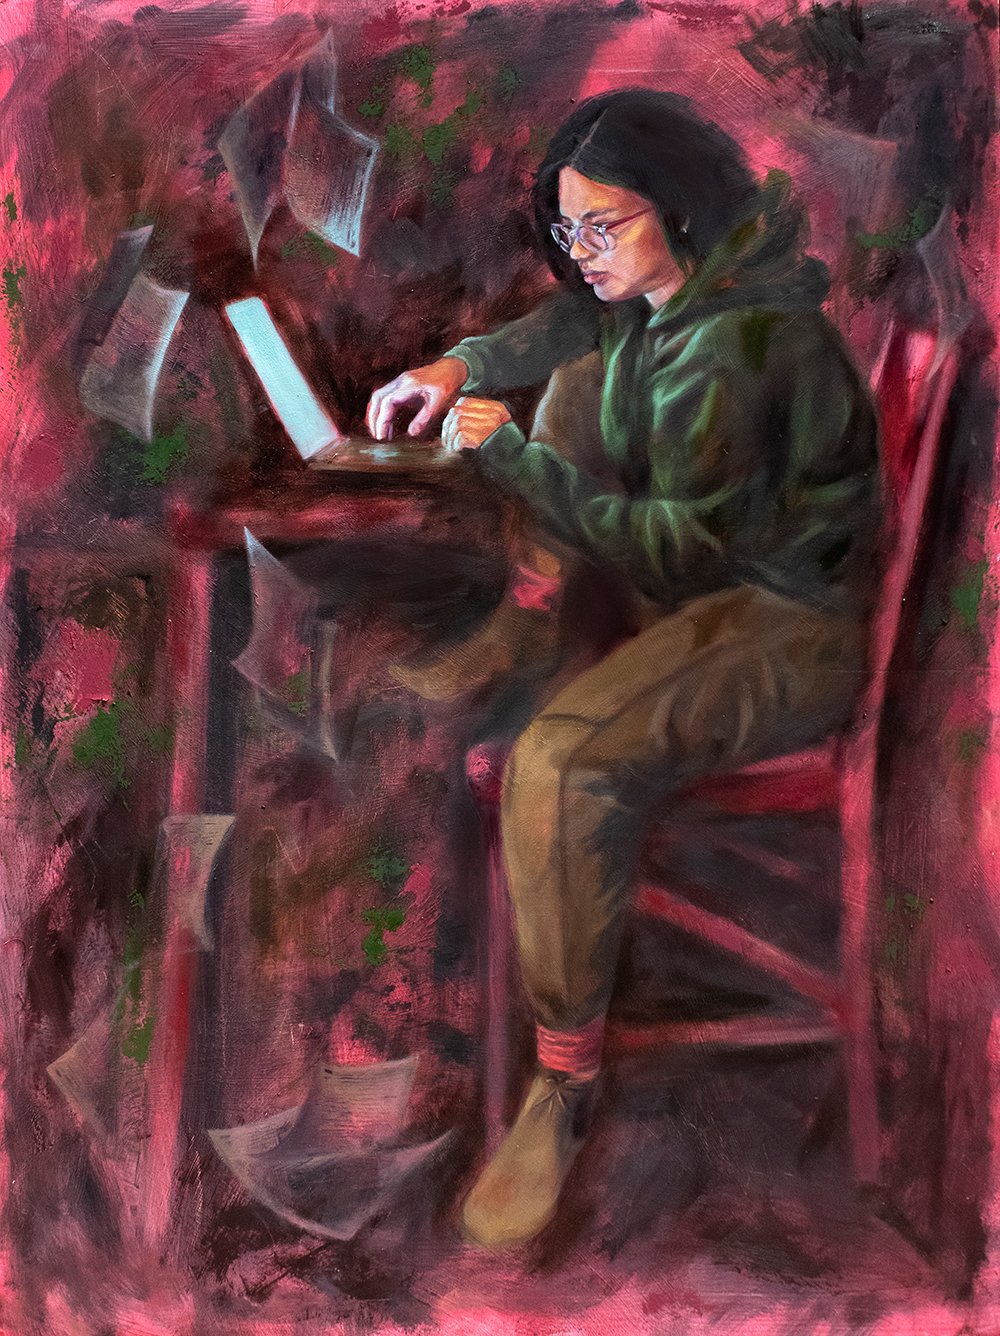 Girl hunches over in chair typing and facing lit screen. She is surrounded by papers, grades, stress, and chaos; an allegory for work as a broken concept.